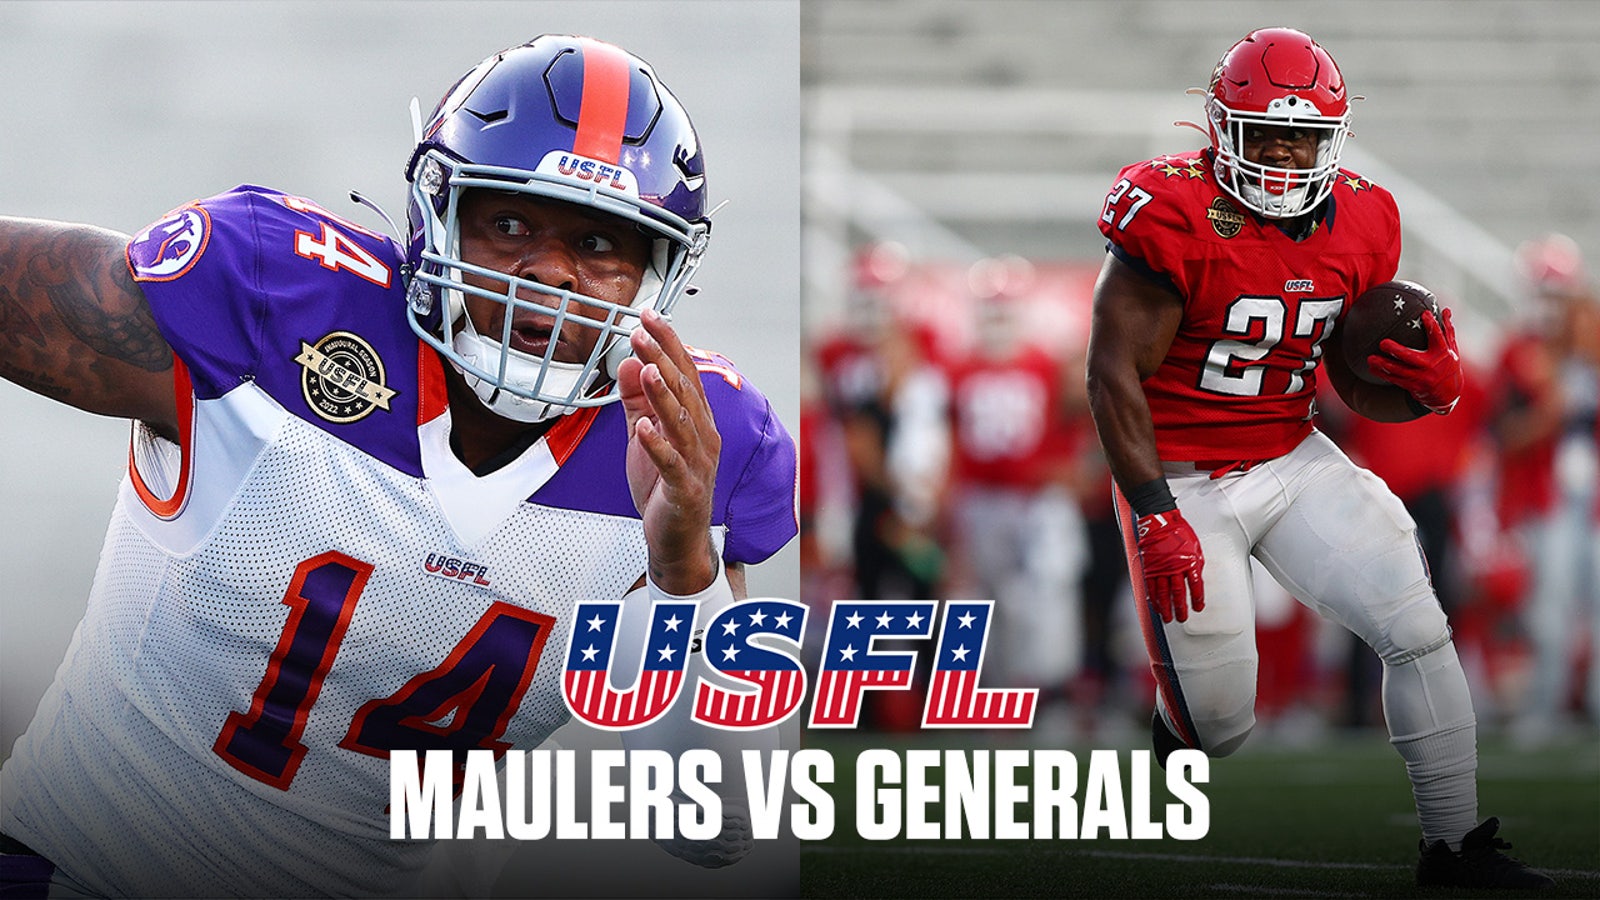 Generals cruise past Maulers in Week 8